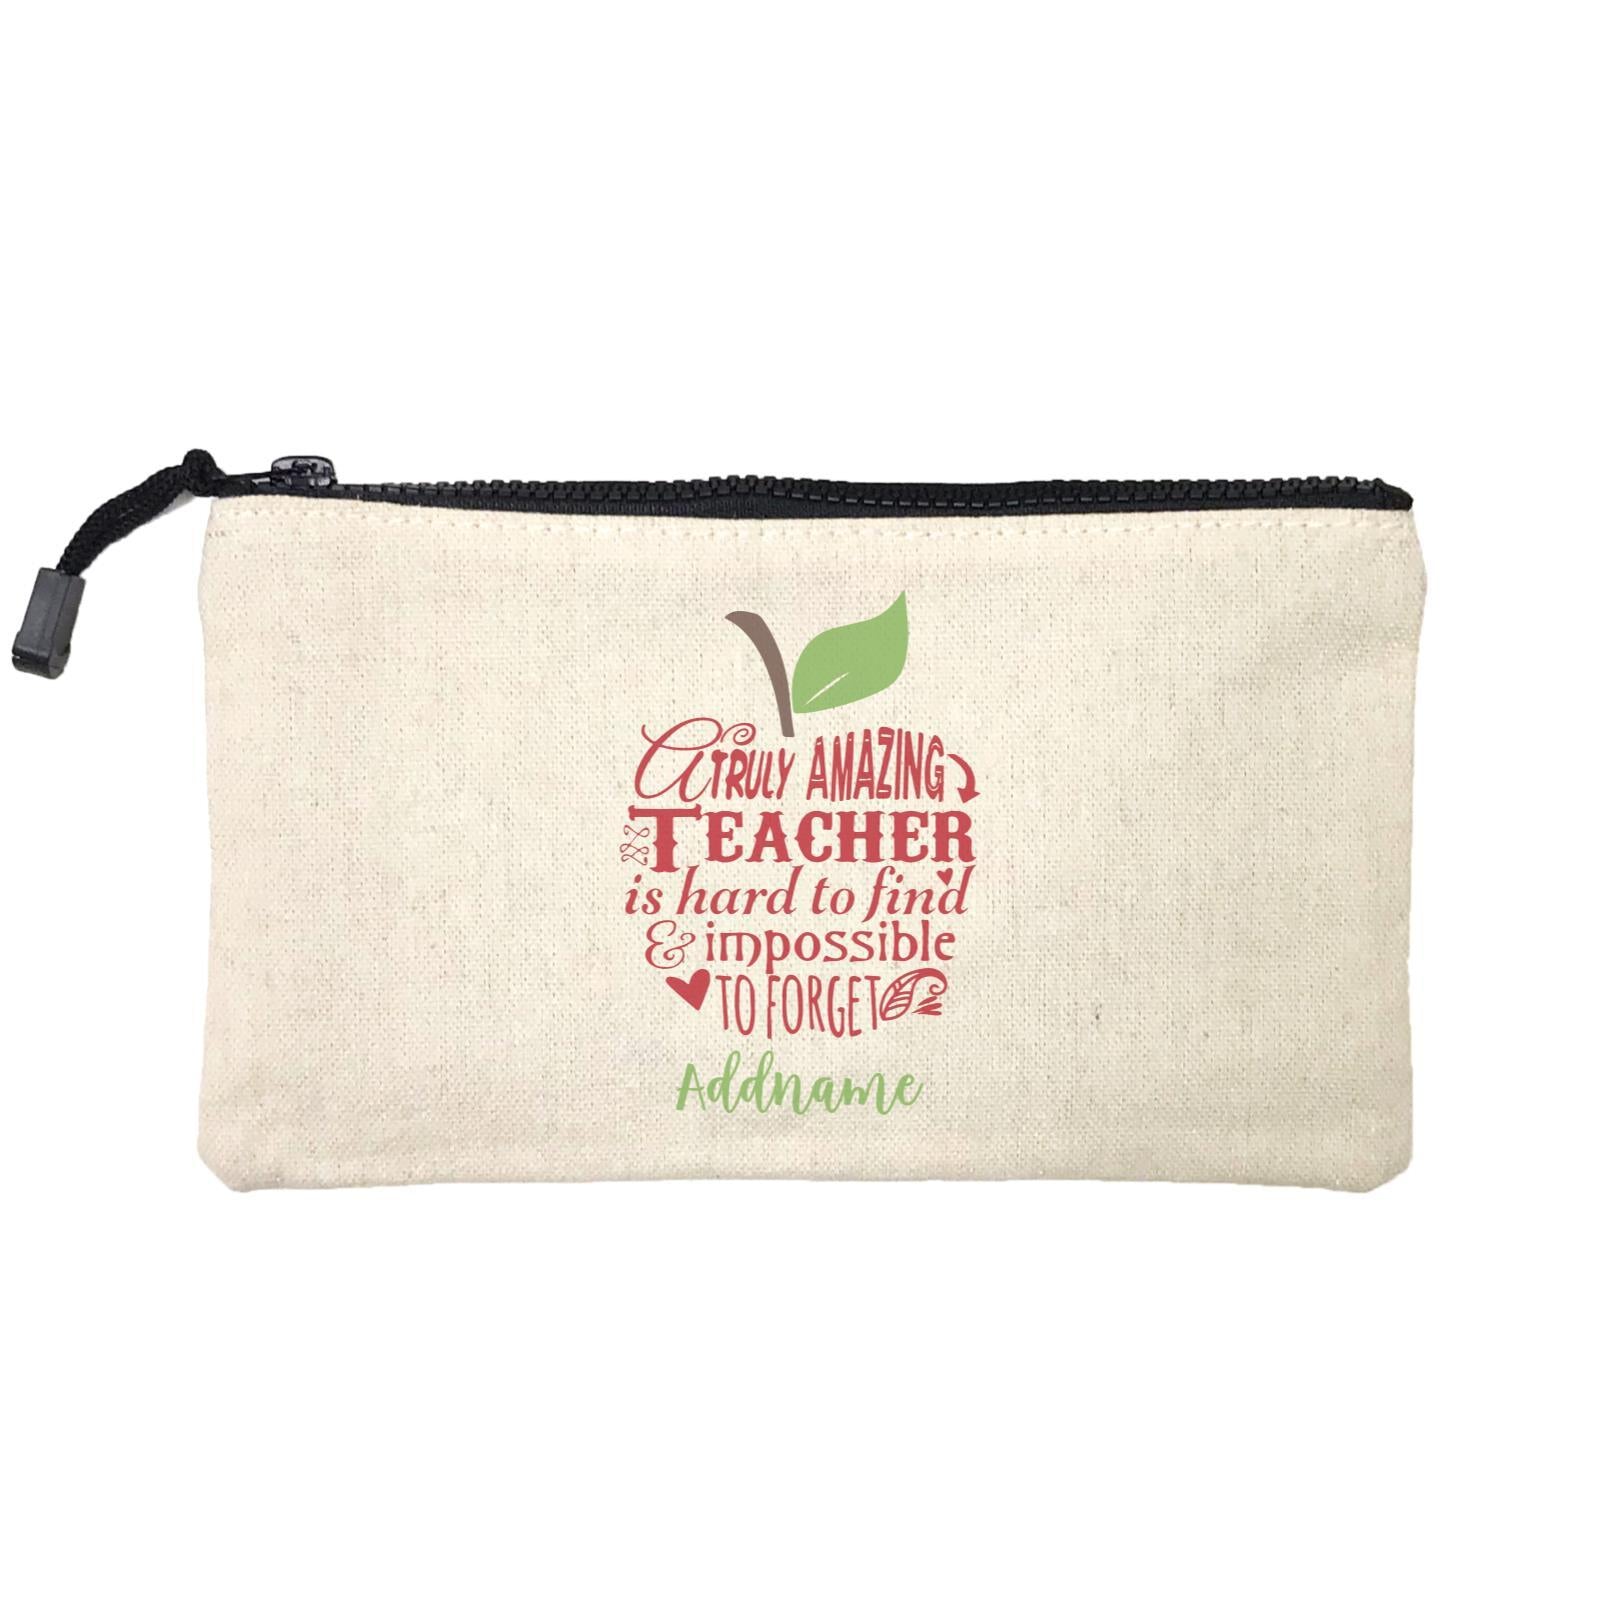 Teacher Apple Truly Amazing Teacher is Hard To Find & Impossible To Forget Addname Mini Accessories Stationery Pouch